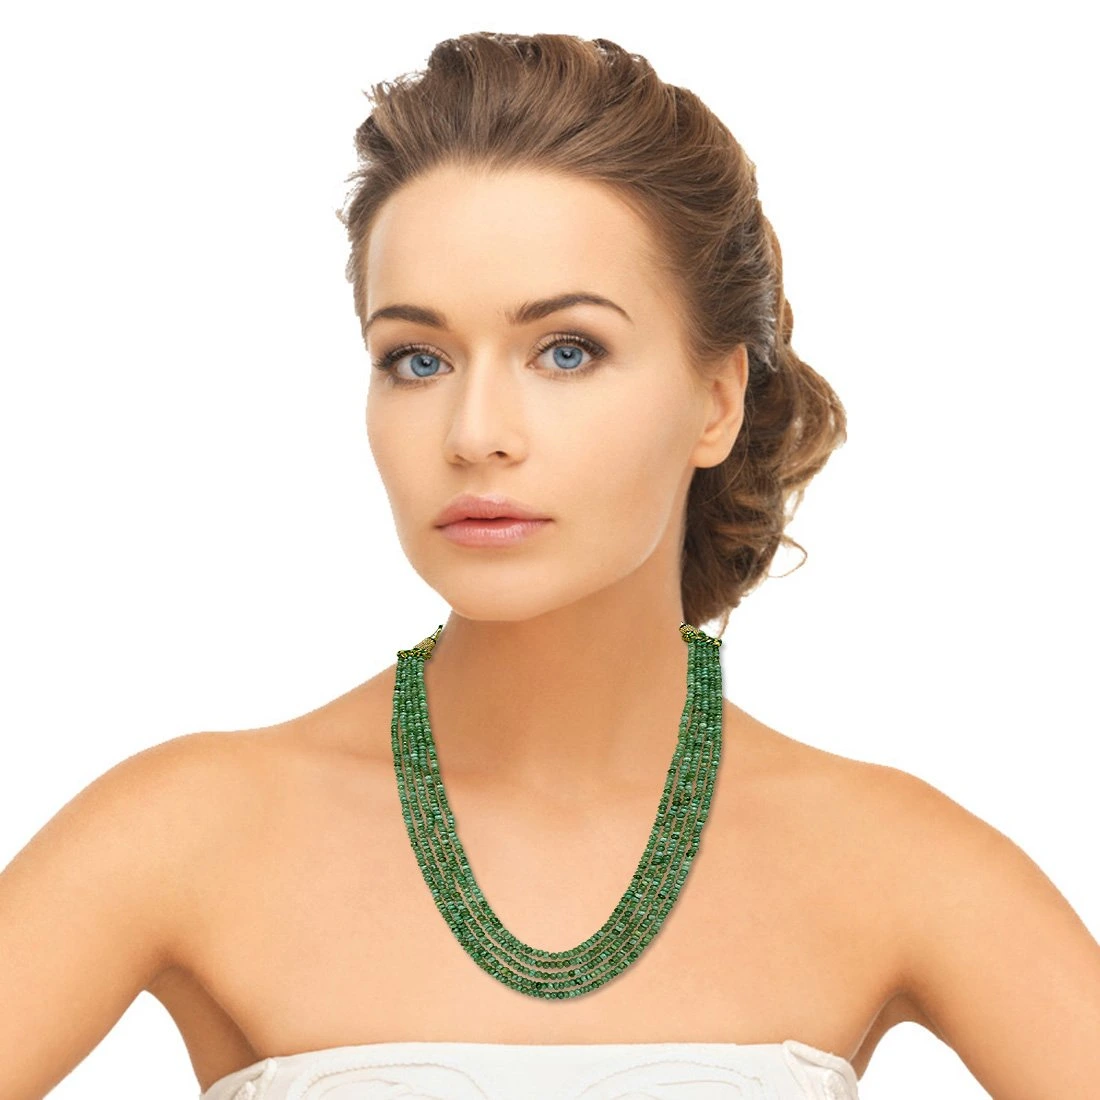 5 Line 263cts REAL Natural Green Emerald Beads Necklace for Women (263cts EMR Neck)